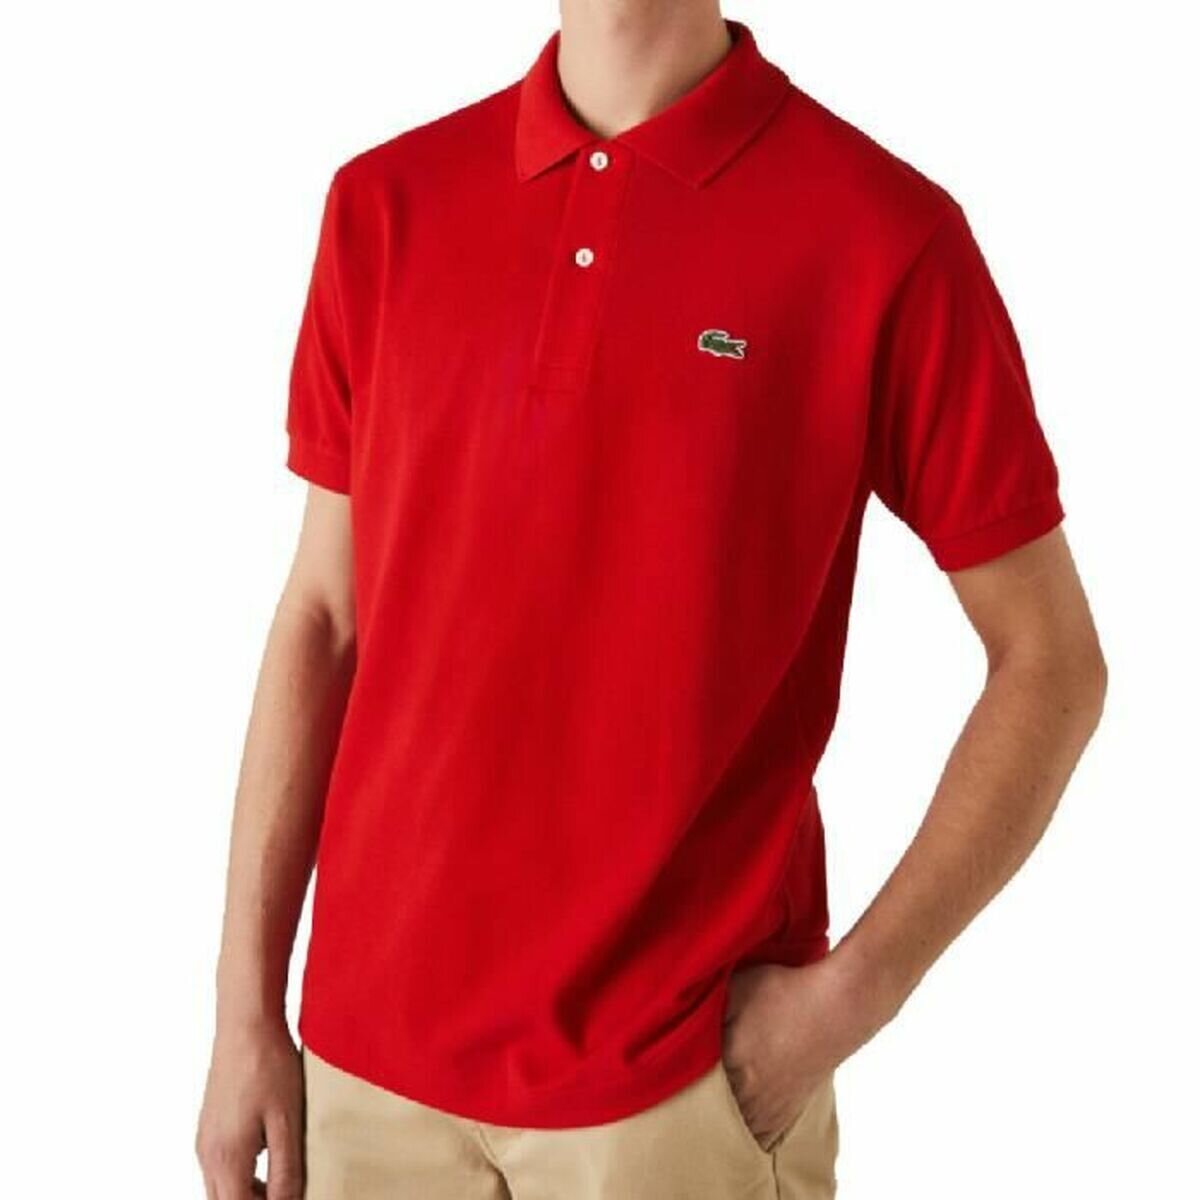 Men's Red Lacoste Polo Shirt